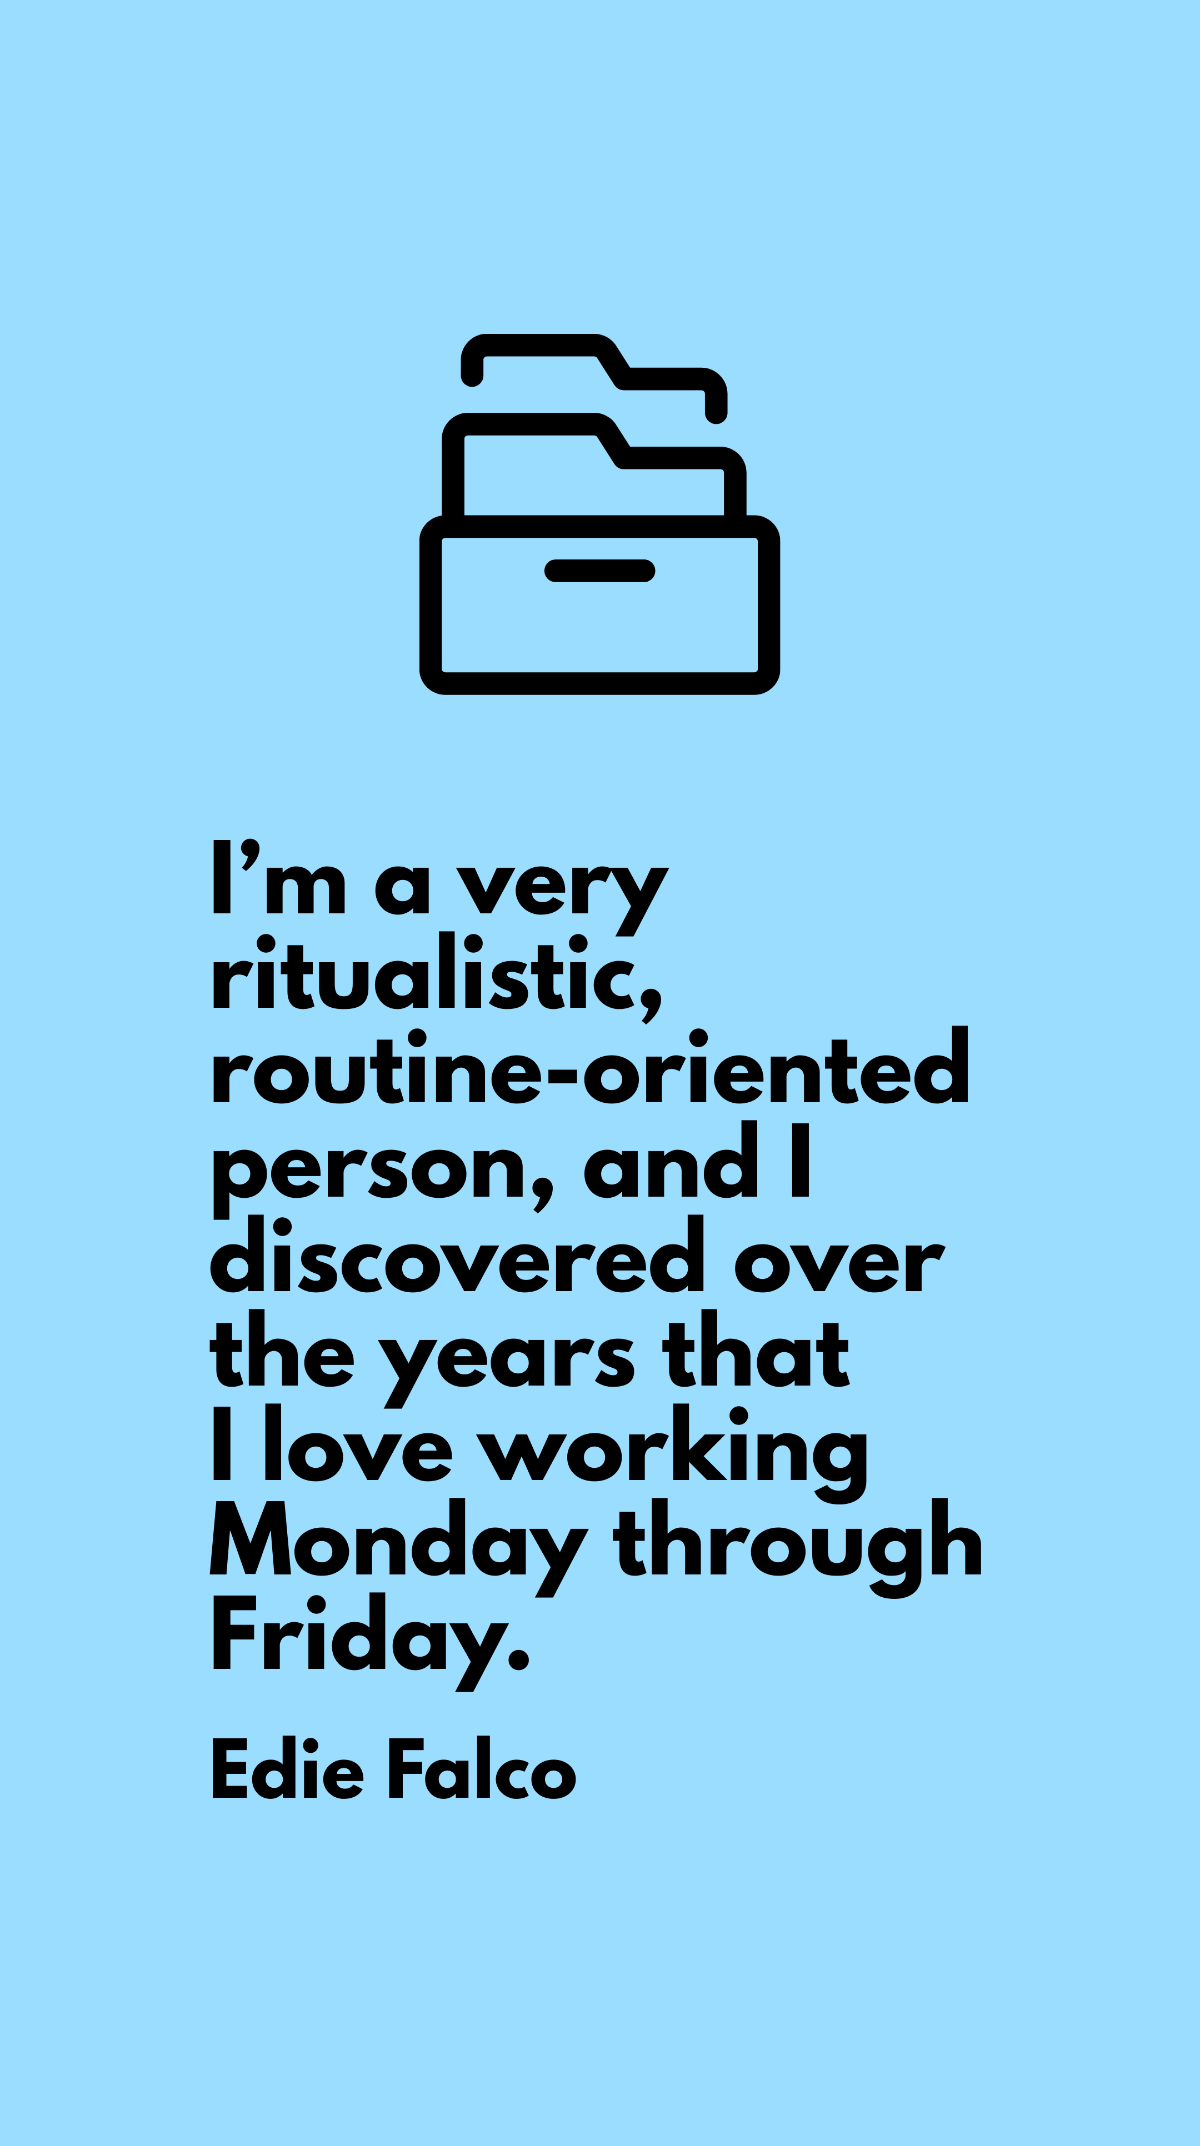 Edie Falco - I’m a very ritualistic, routine-oriented person, and I discovered over the years that I love working Monday through Friday. 